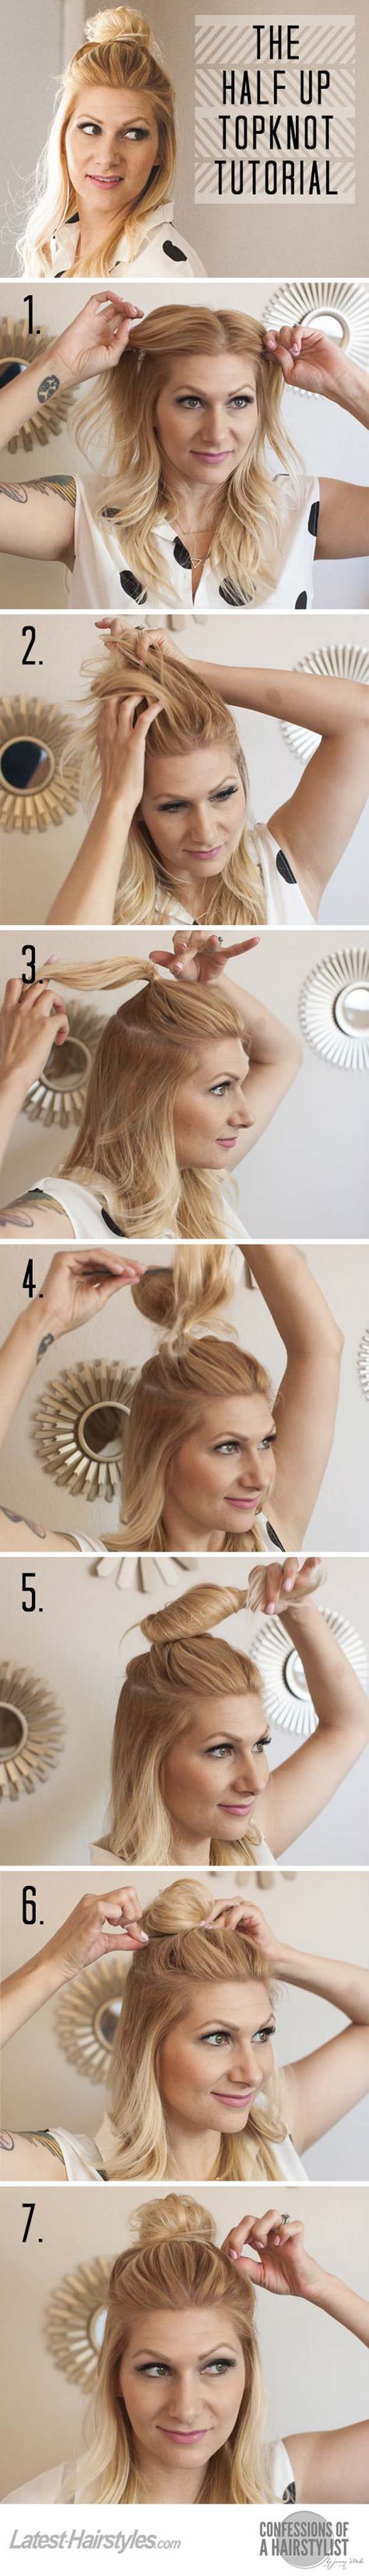 Cool and Easy DIY Hairstyles - The Half Up Top Knot - Quick and Easy Ideas for Back to School Styles for Medium, Short and Long Hair - Fun Tips and Best Step by Step Tutorials for Teens, Prom, Weddings, Special Occasions and Work. Up dos, Braids, Top Knots and Buns, Super Summer Looks http://diyprojectsforteens.com/diy-cool-easy-hairstyles